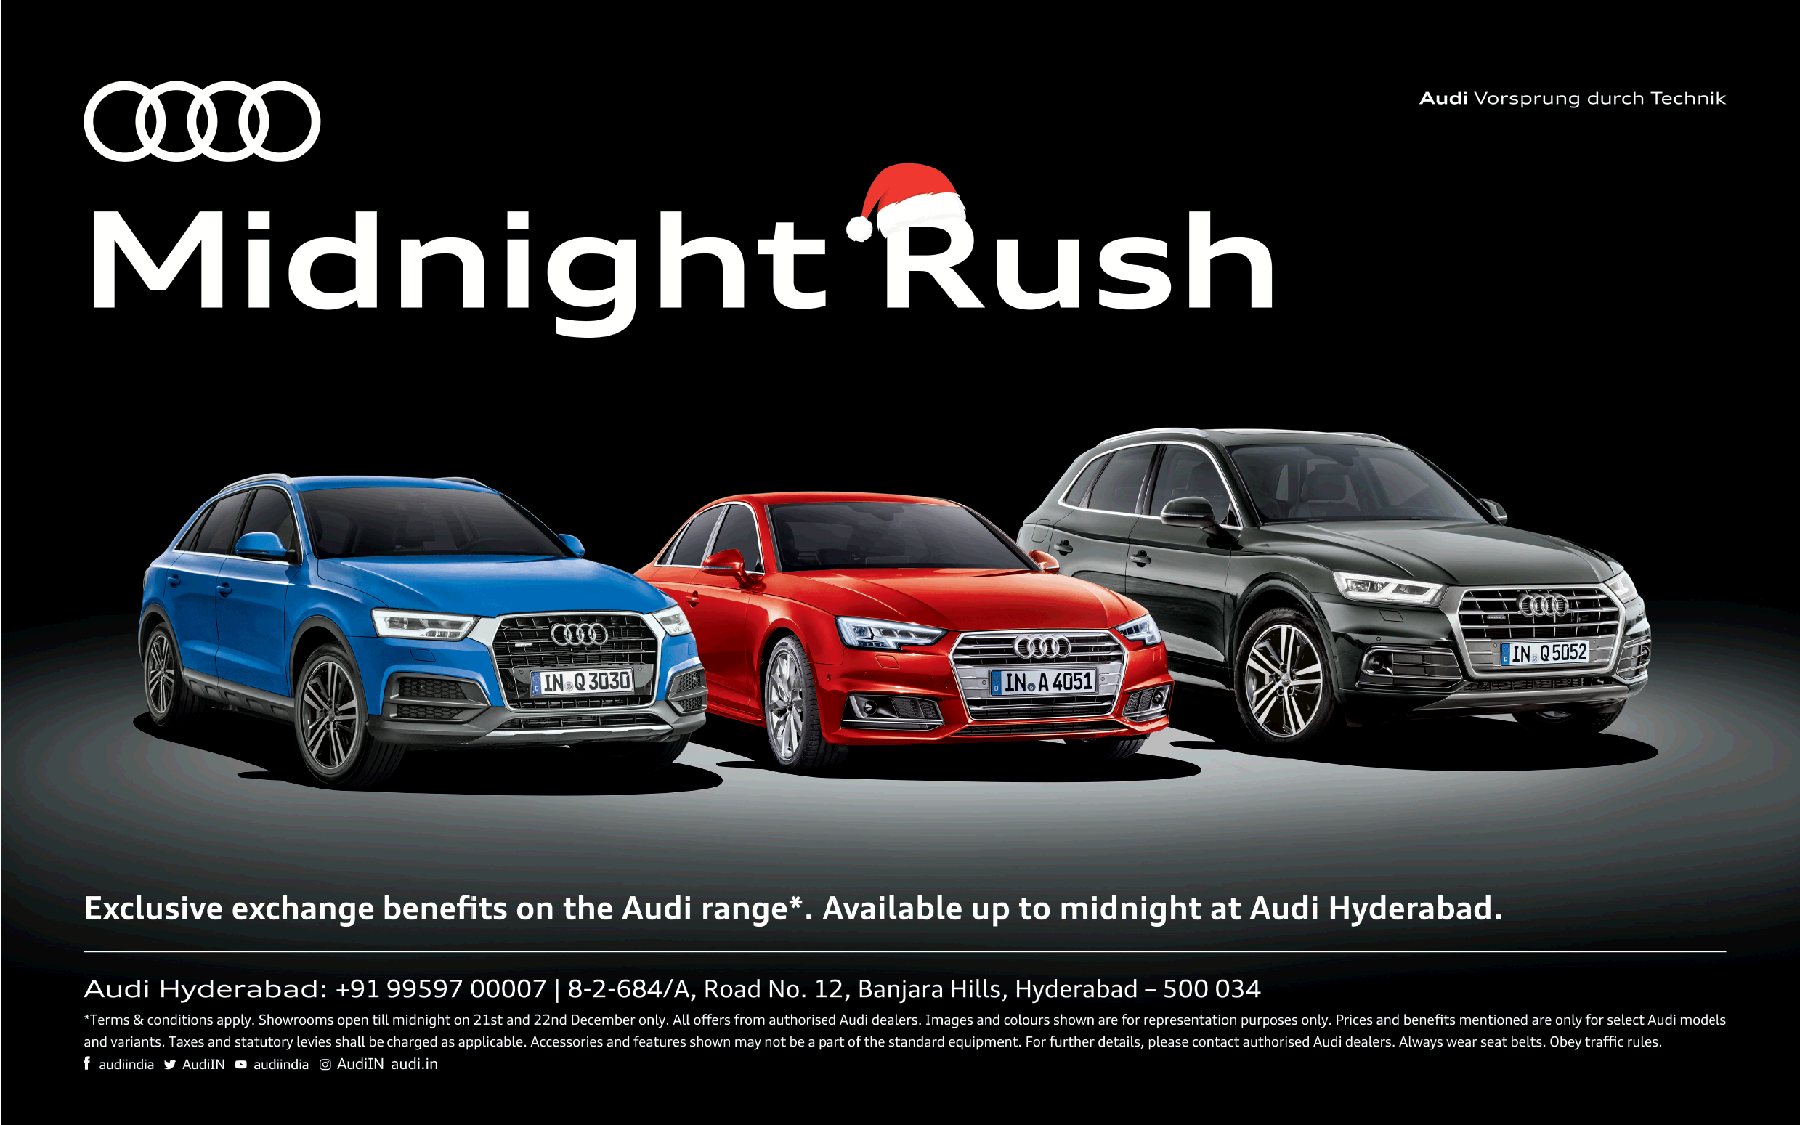 audi-midnight-rush-exlusive-exchange-benefits-on-the-audi-range-ad-times-of-india-hyderabad-21-12-2018.png